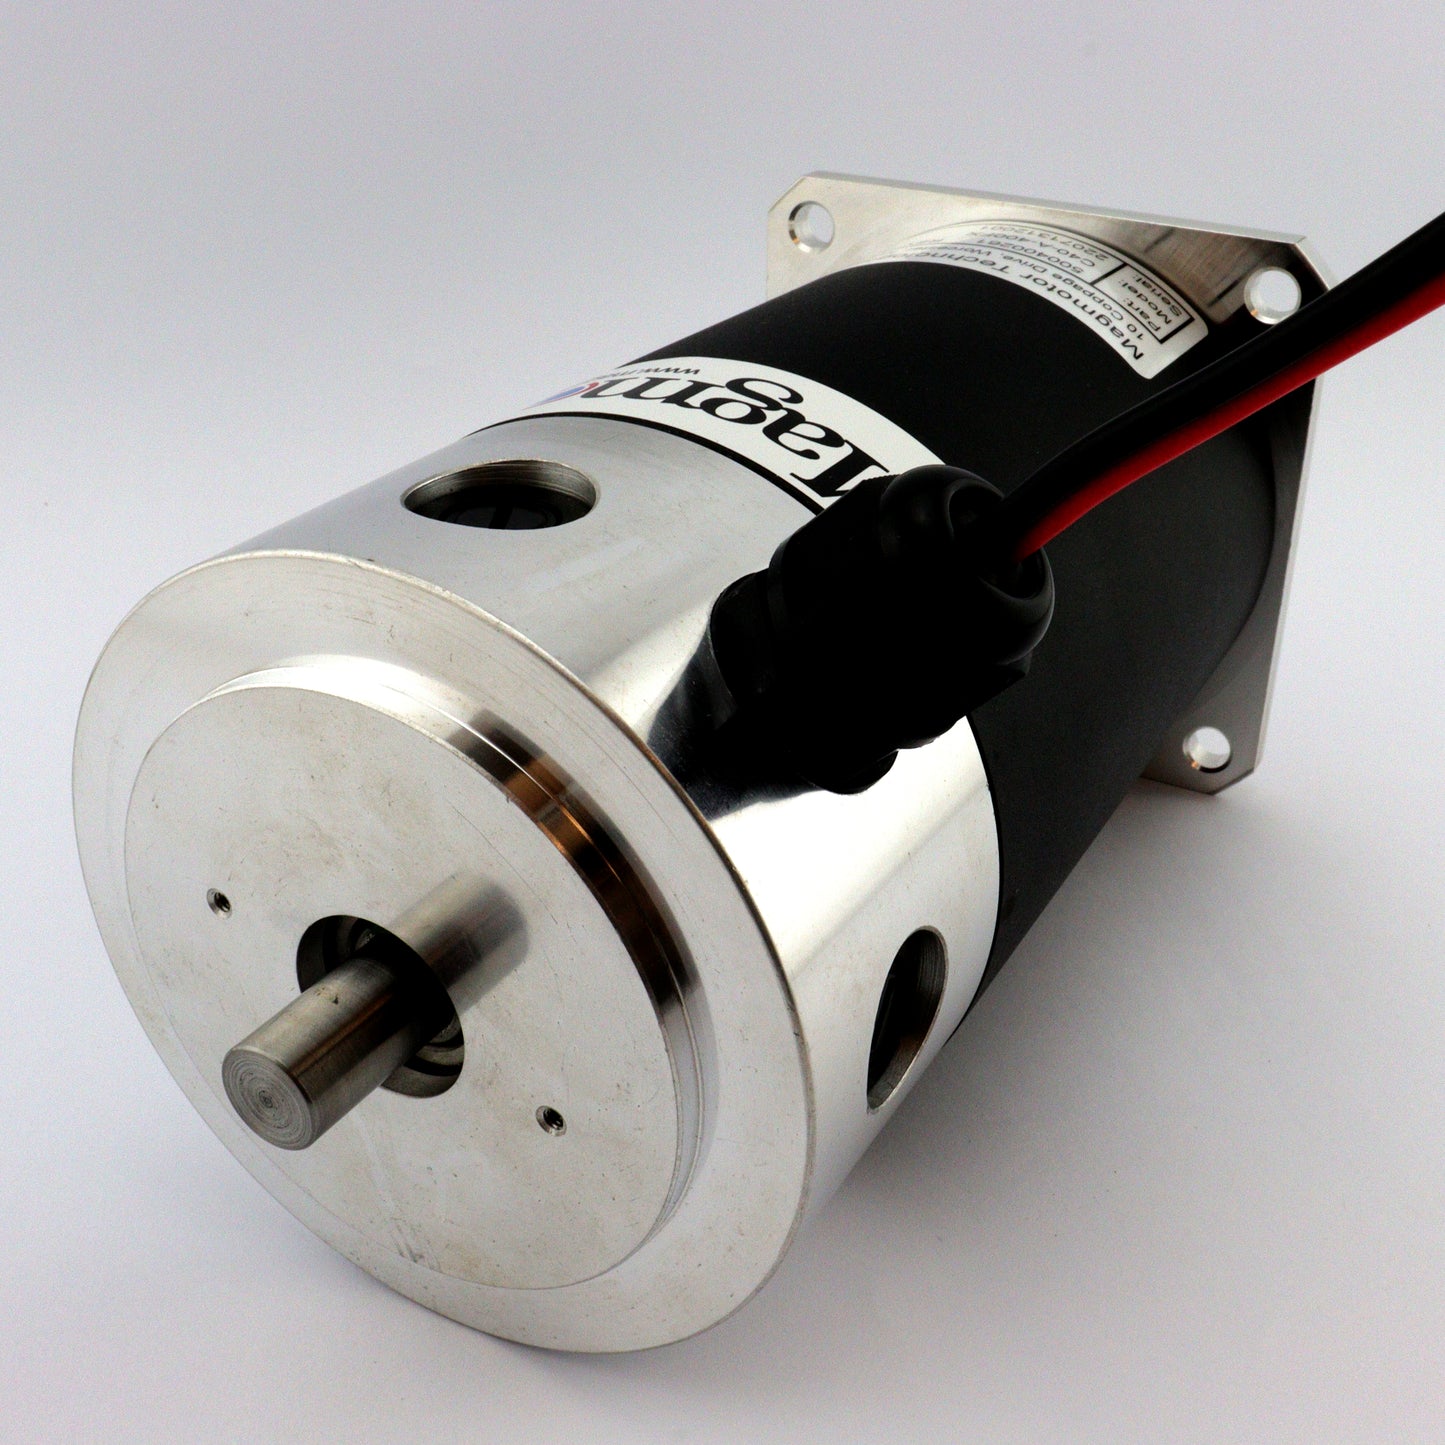 Magmotor C40-A-400FX Brushed Motor 500400261 Rear View